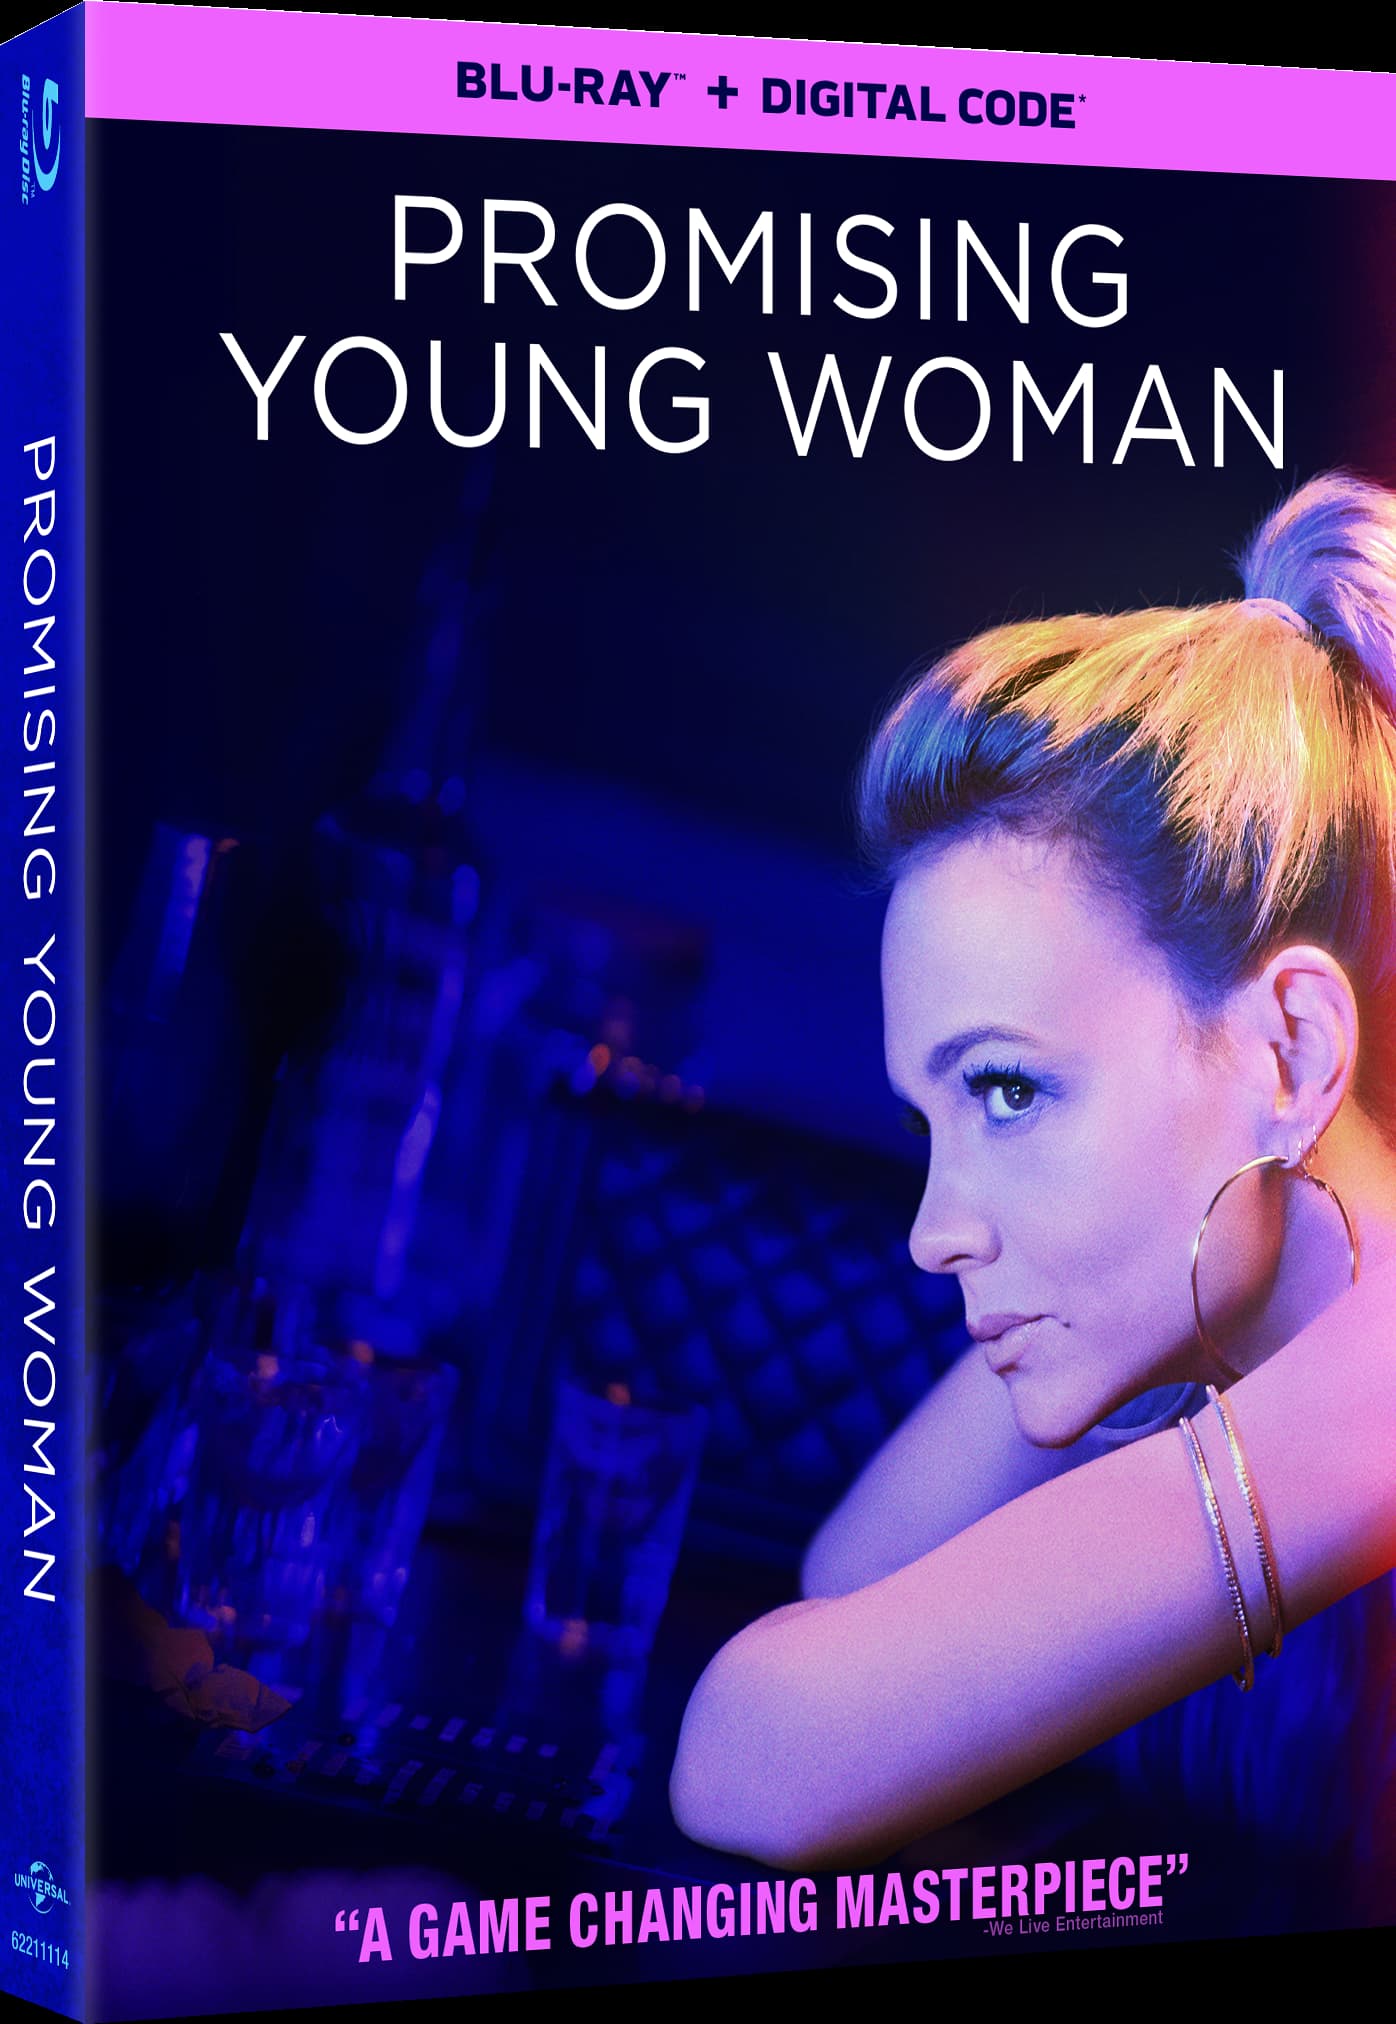 Promising Young Woman Blu-Ray